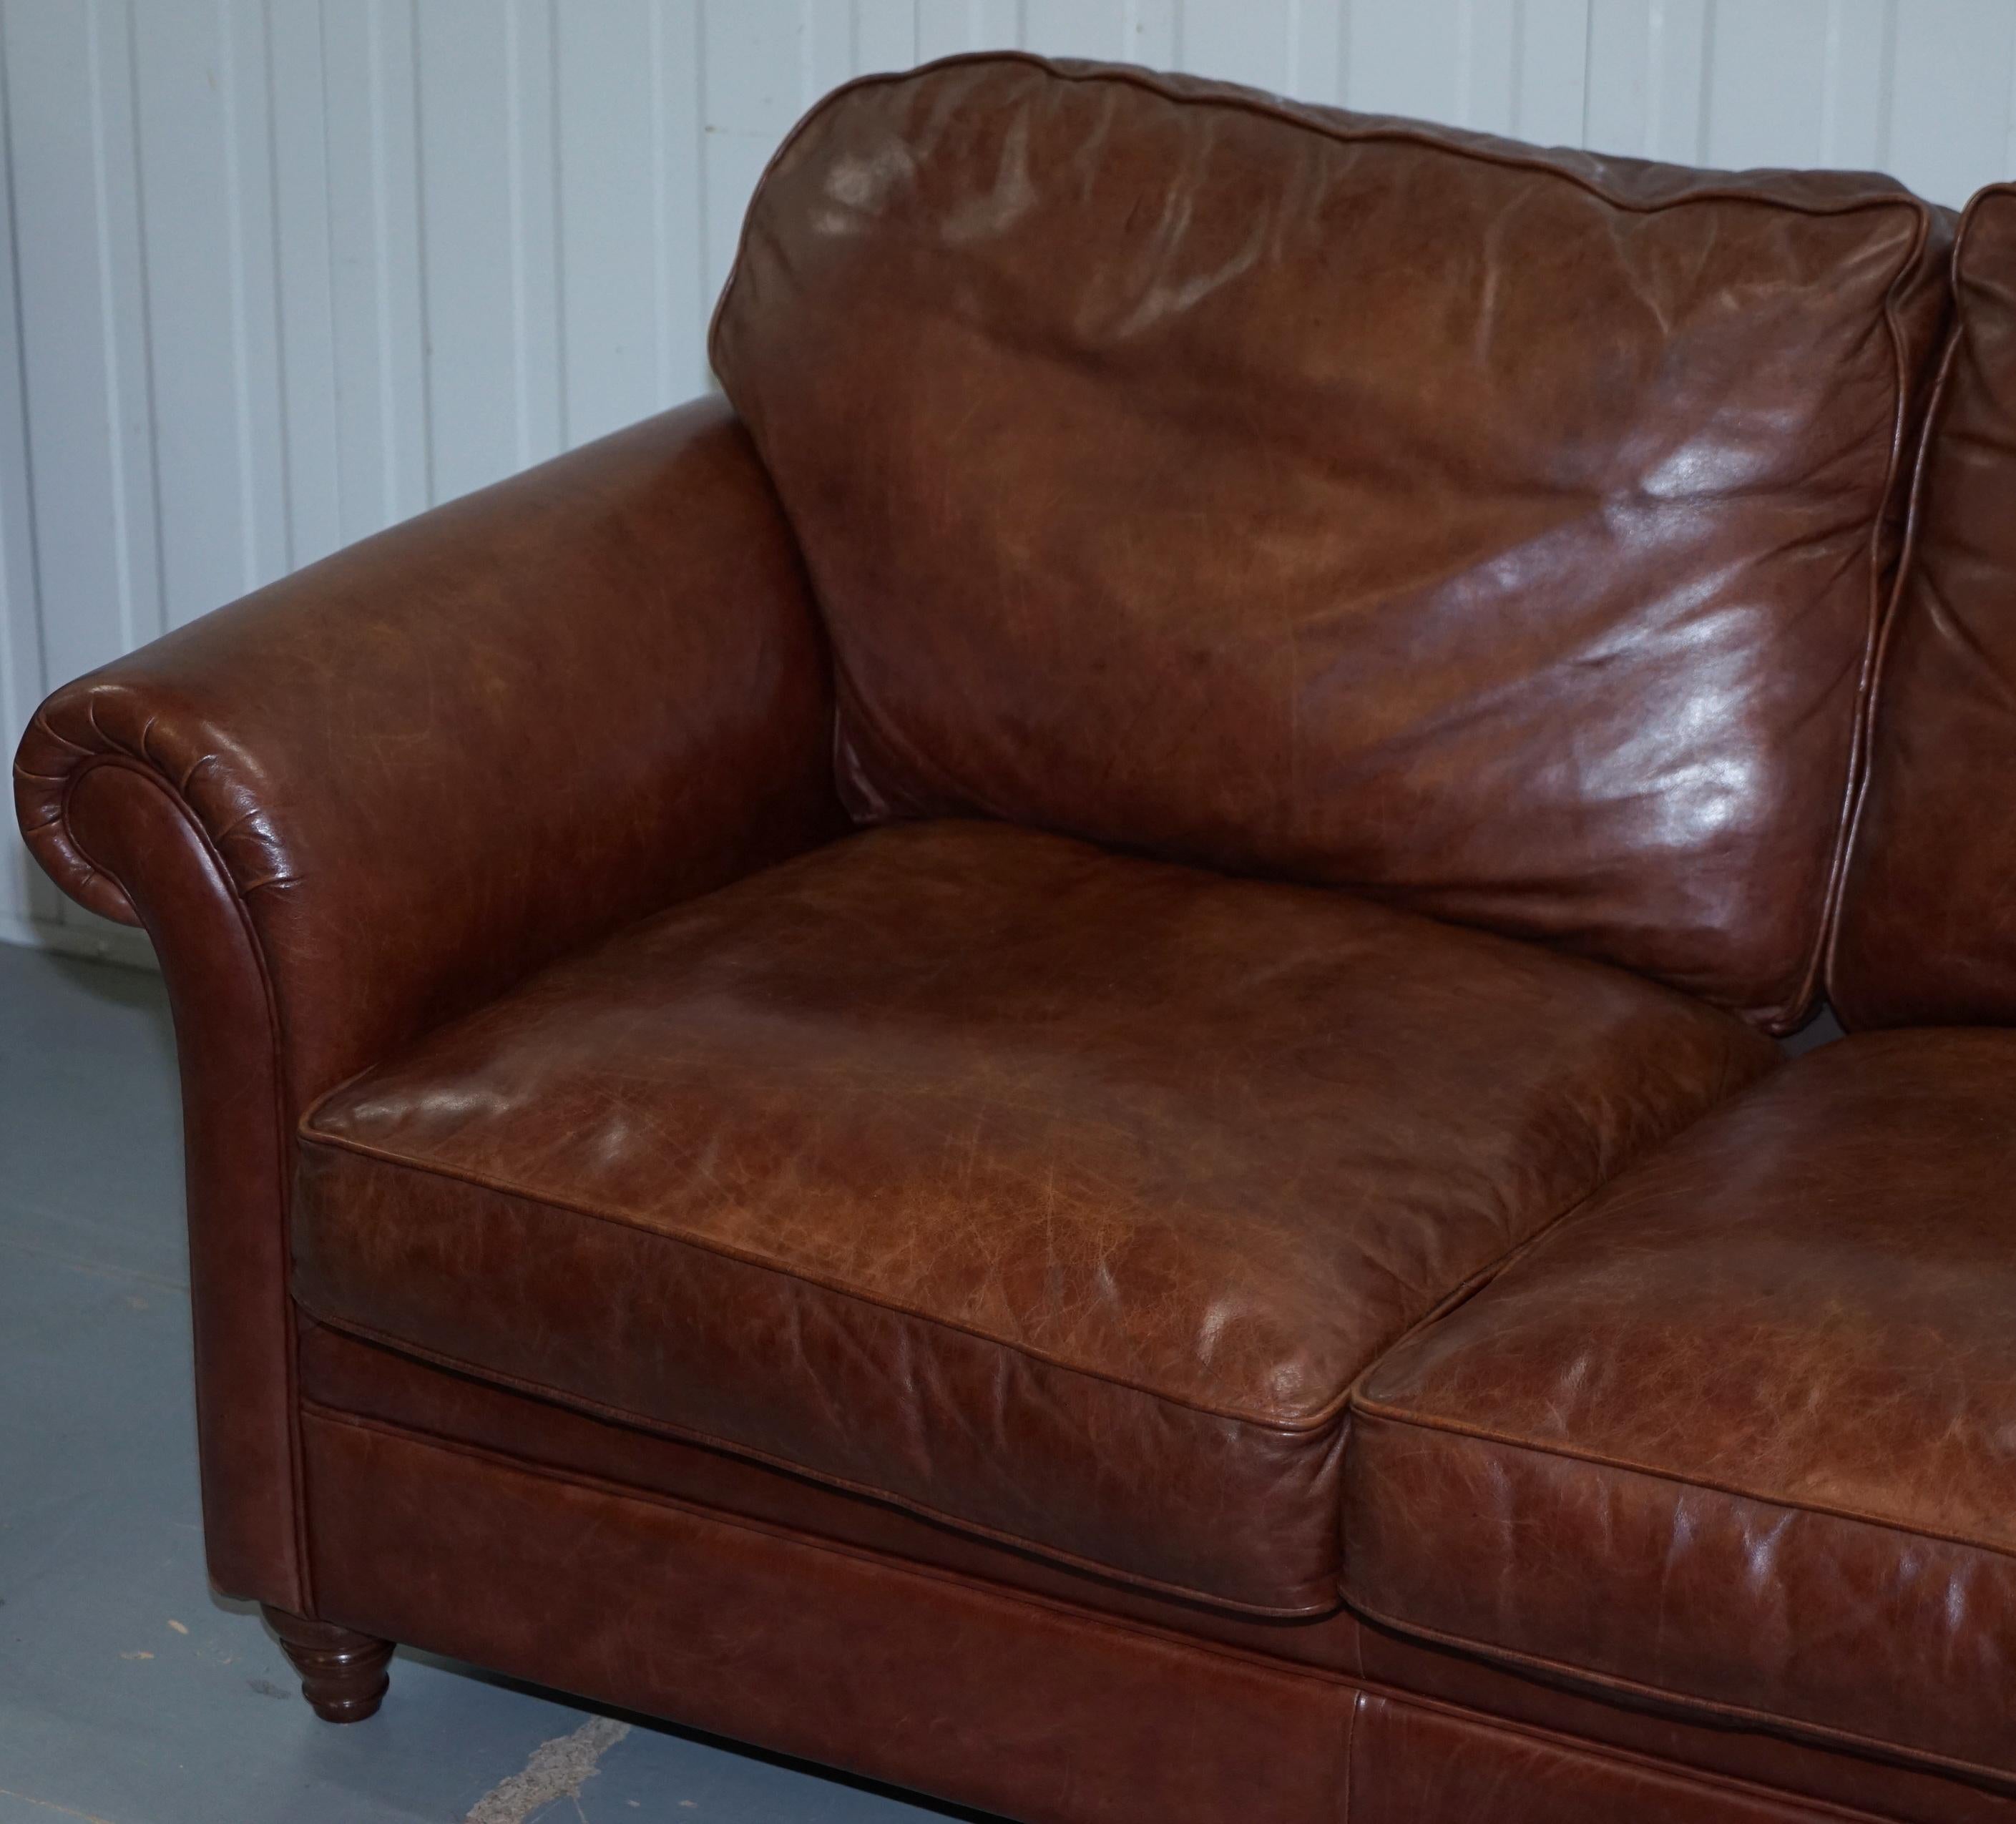 laura ashley leather sofa bed